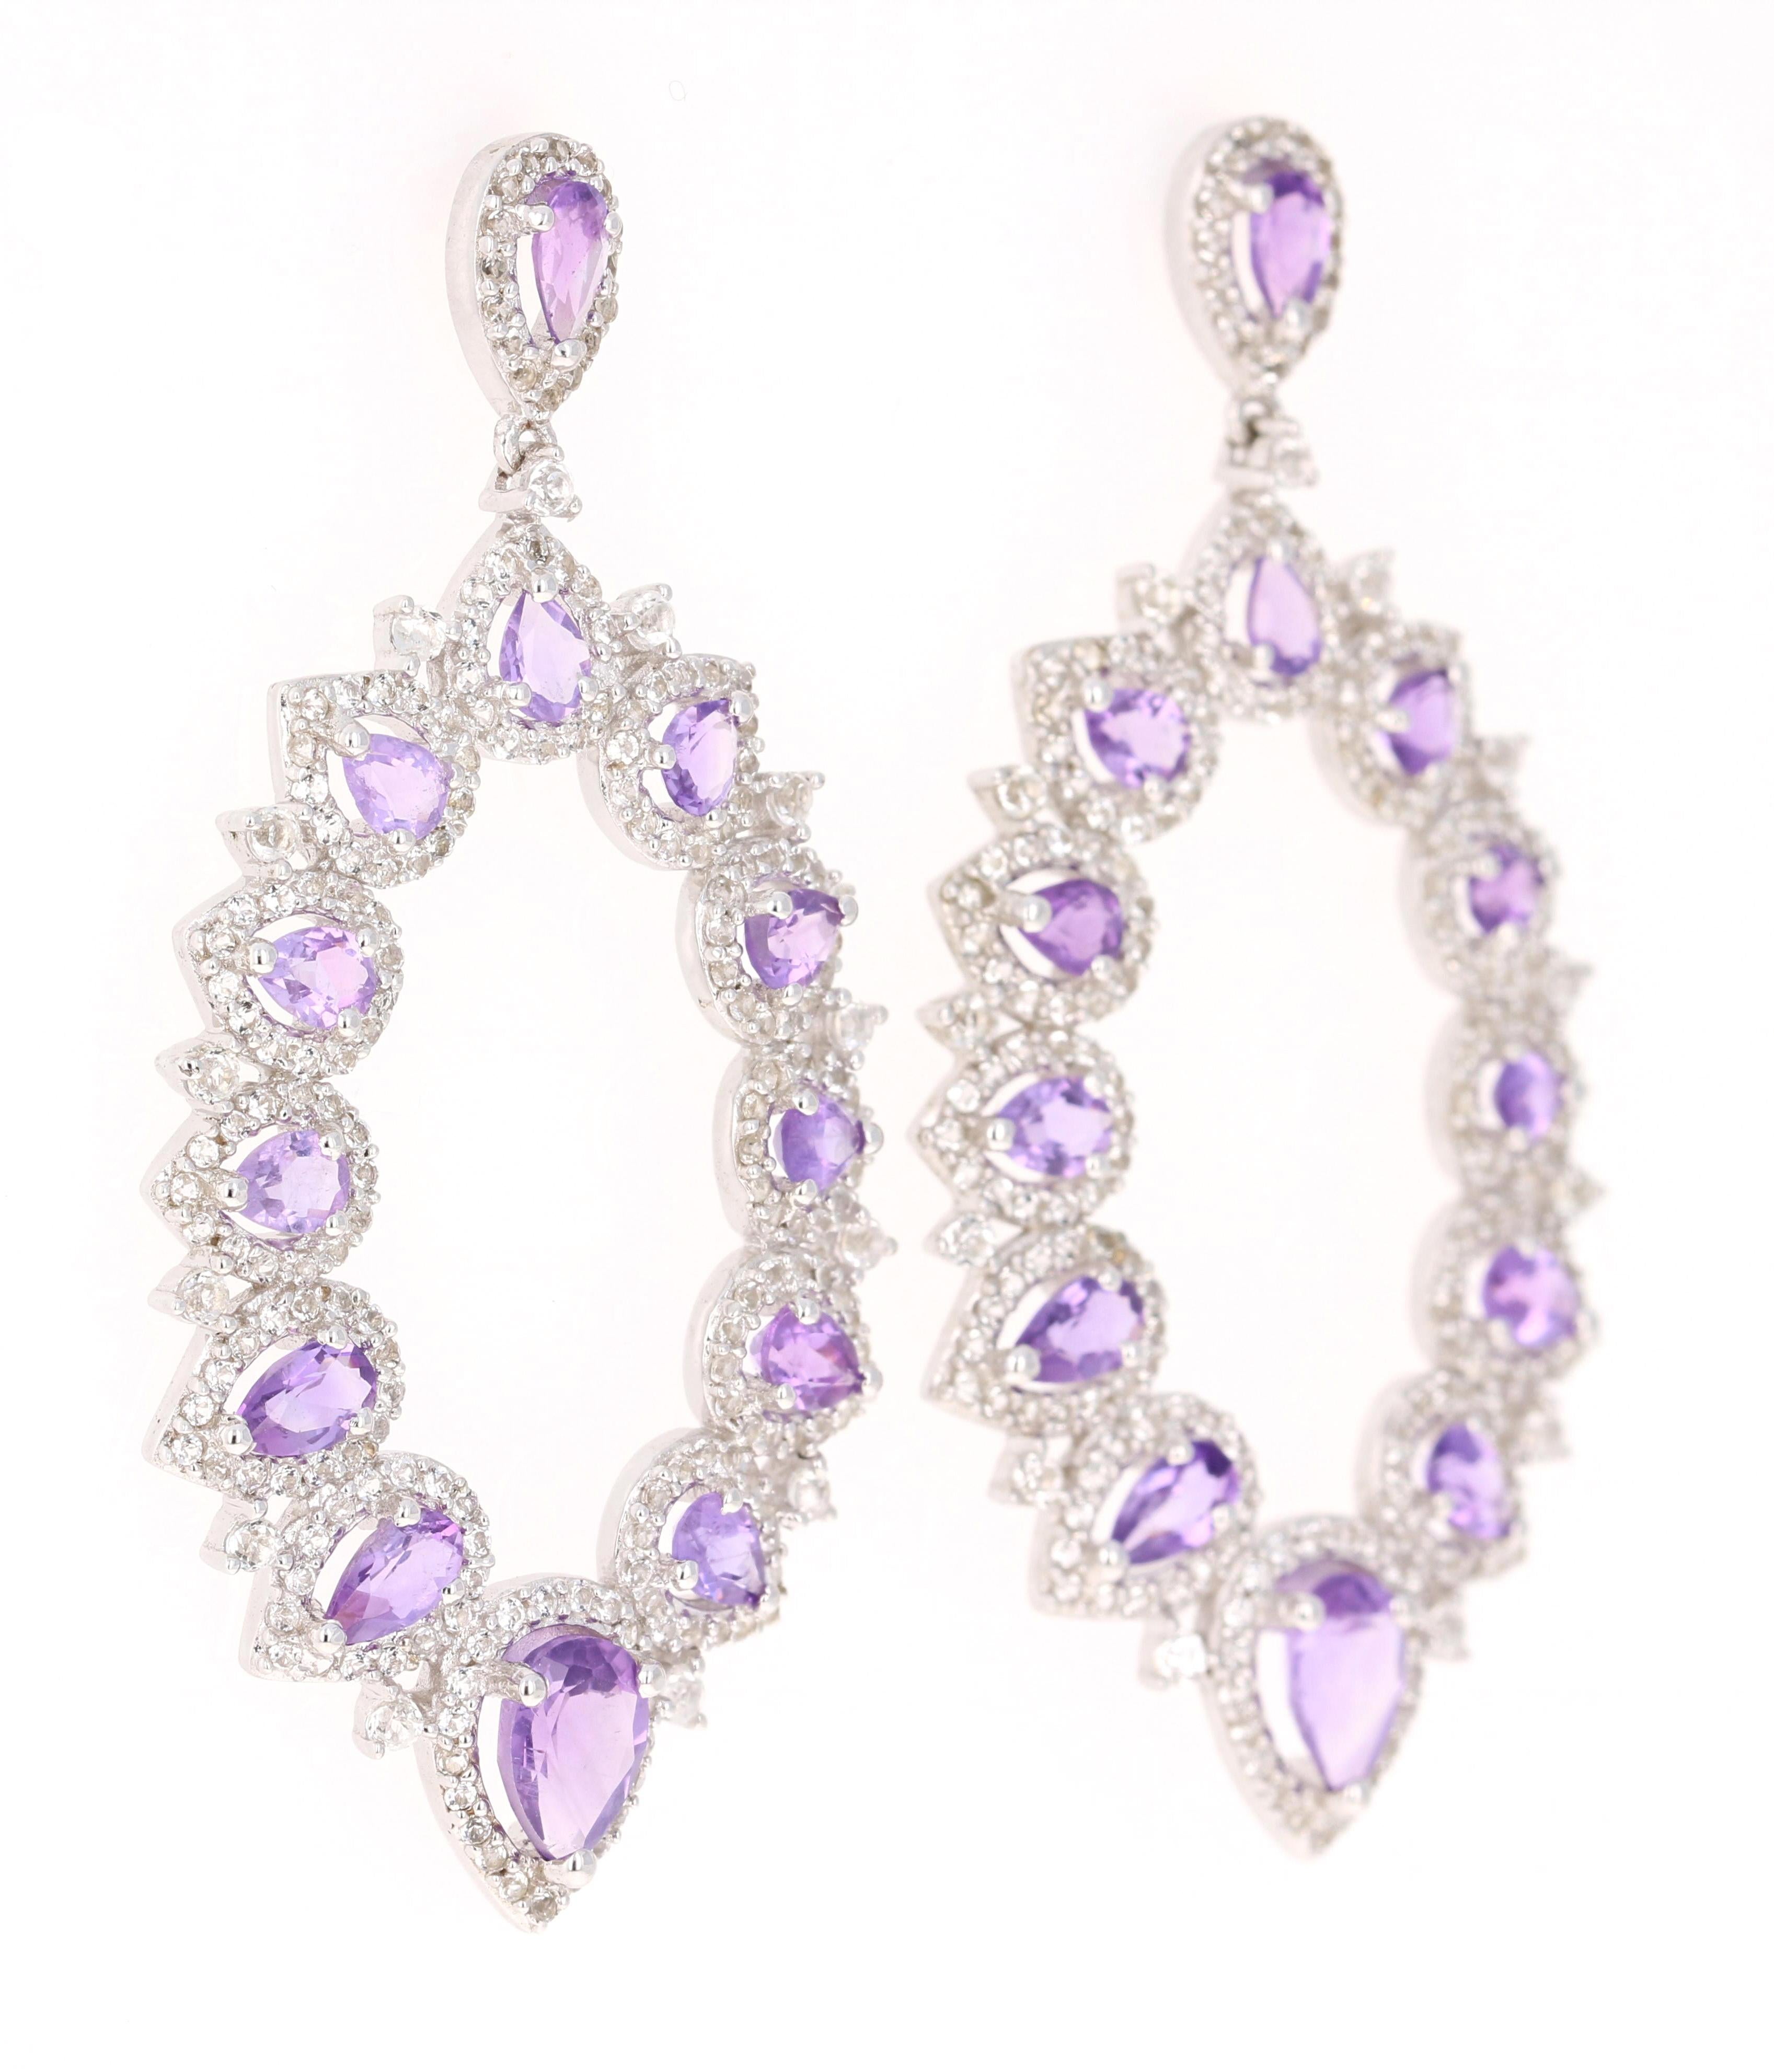 Stunning Dangle Earrings 

These earrings have 4.03 Carats of Amethyst and White Topaz.

They are beautifully curated in 925 Silver weighing approximately 12.7 grams 

They are 2 inches long. 
